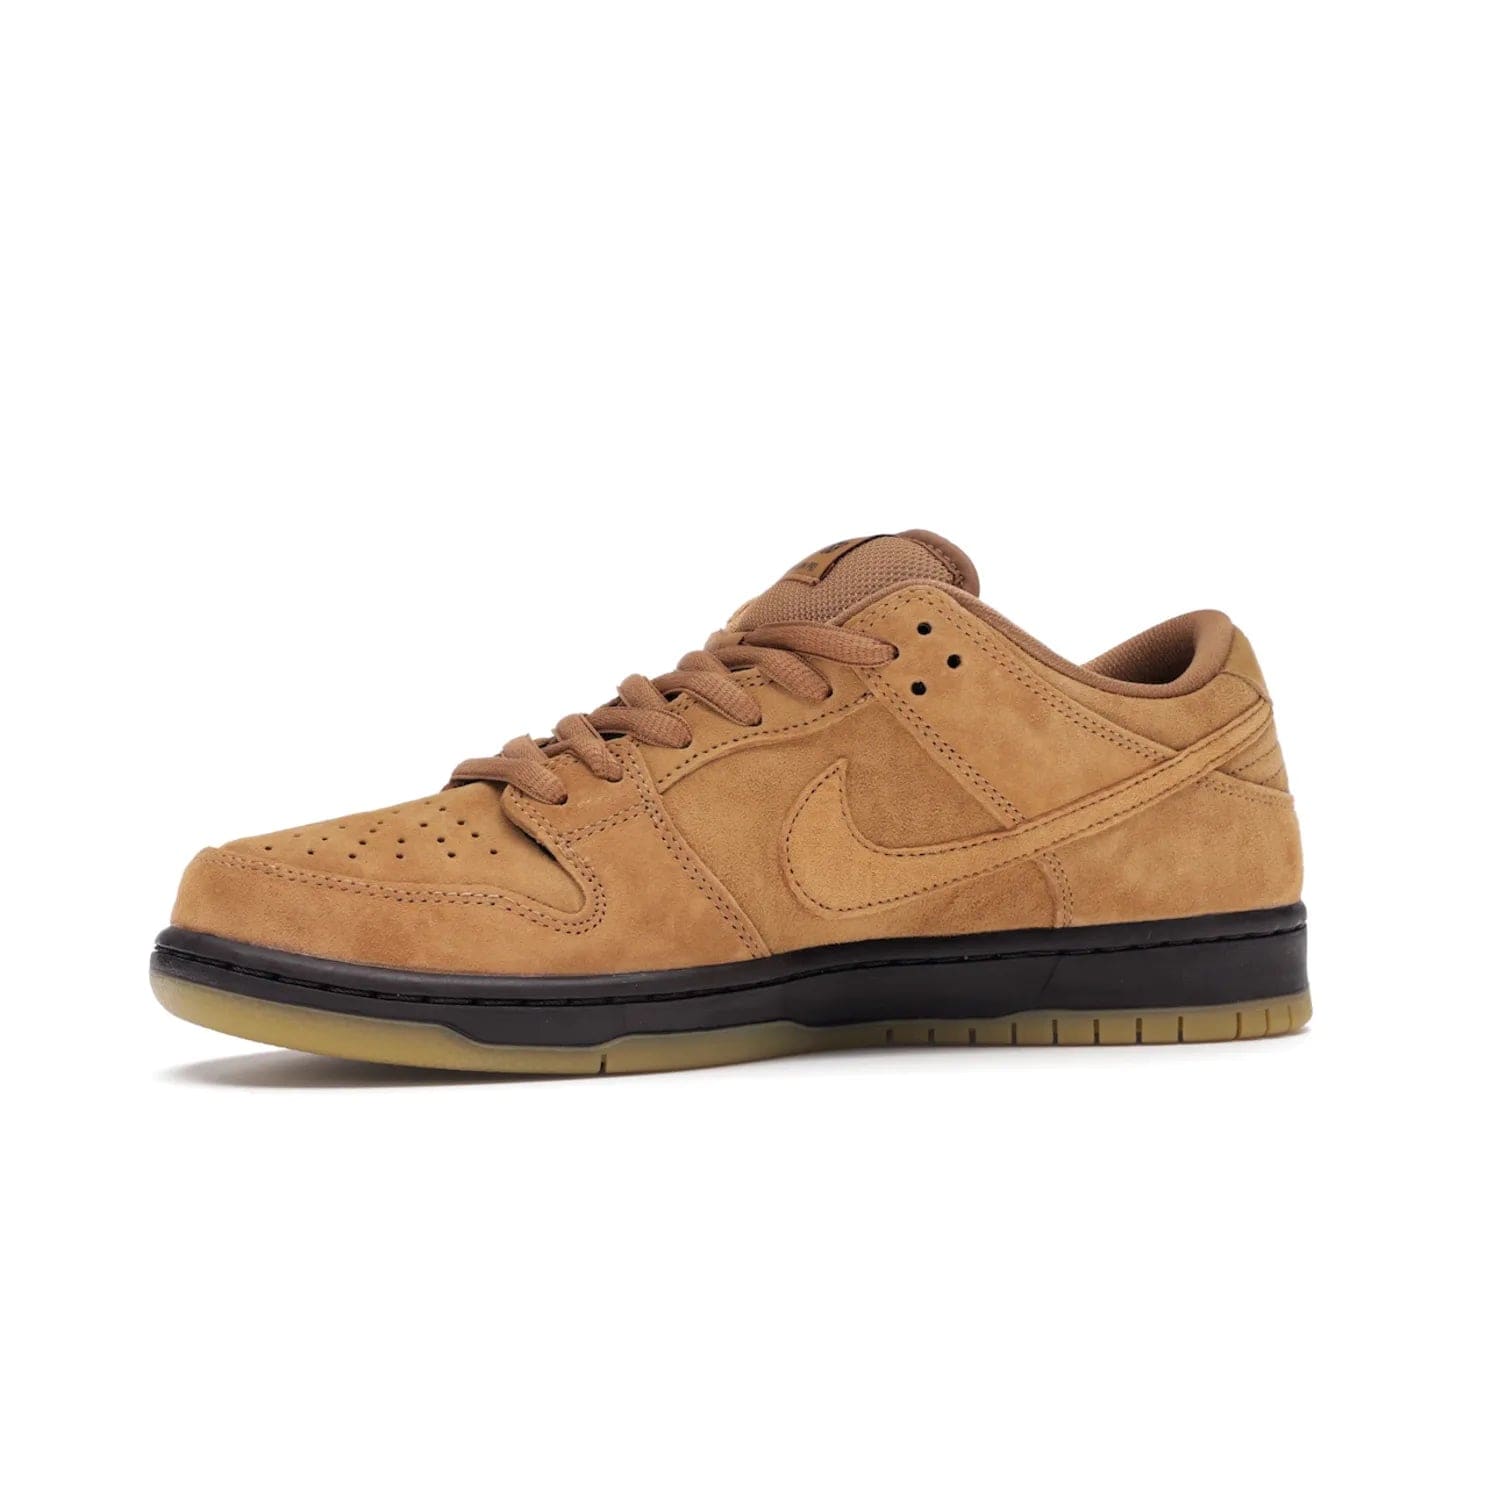 Nike SB Dunk Low Wheat (2021/2023) - Image 17 - Only at www.BallersClubKickz.com - The Nike SB Dunk Low Wheat (2021/2023)has a sleek silhouette and wheat suede upper. Tan tones for lining, mesh tongues, and laces. Iconic color palette midsole, perforated boxing toe. Brown branding on tongue and heel. Gum rubber outsole with partitioned pattern for traction. Eschewed in Feb 2021 for $110.